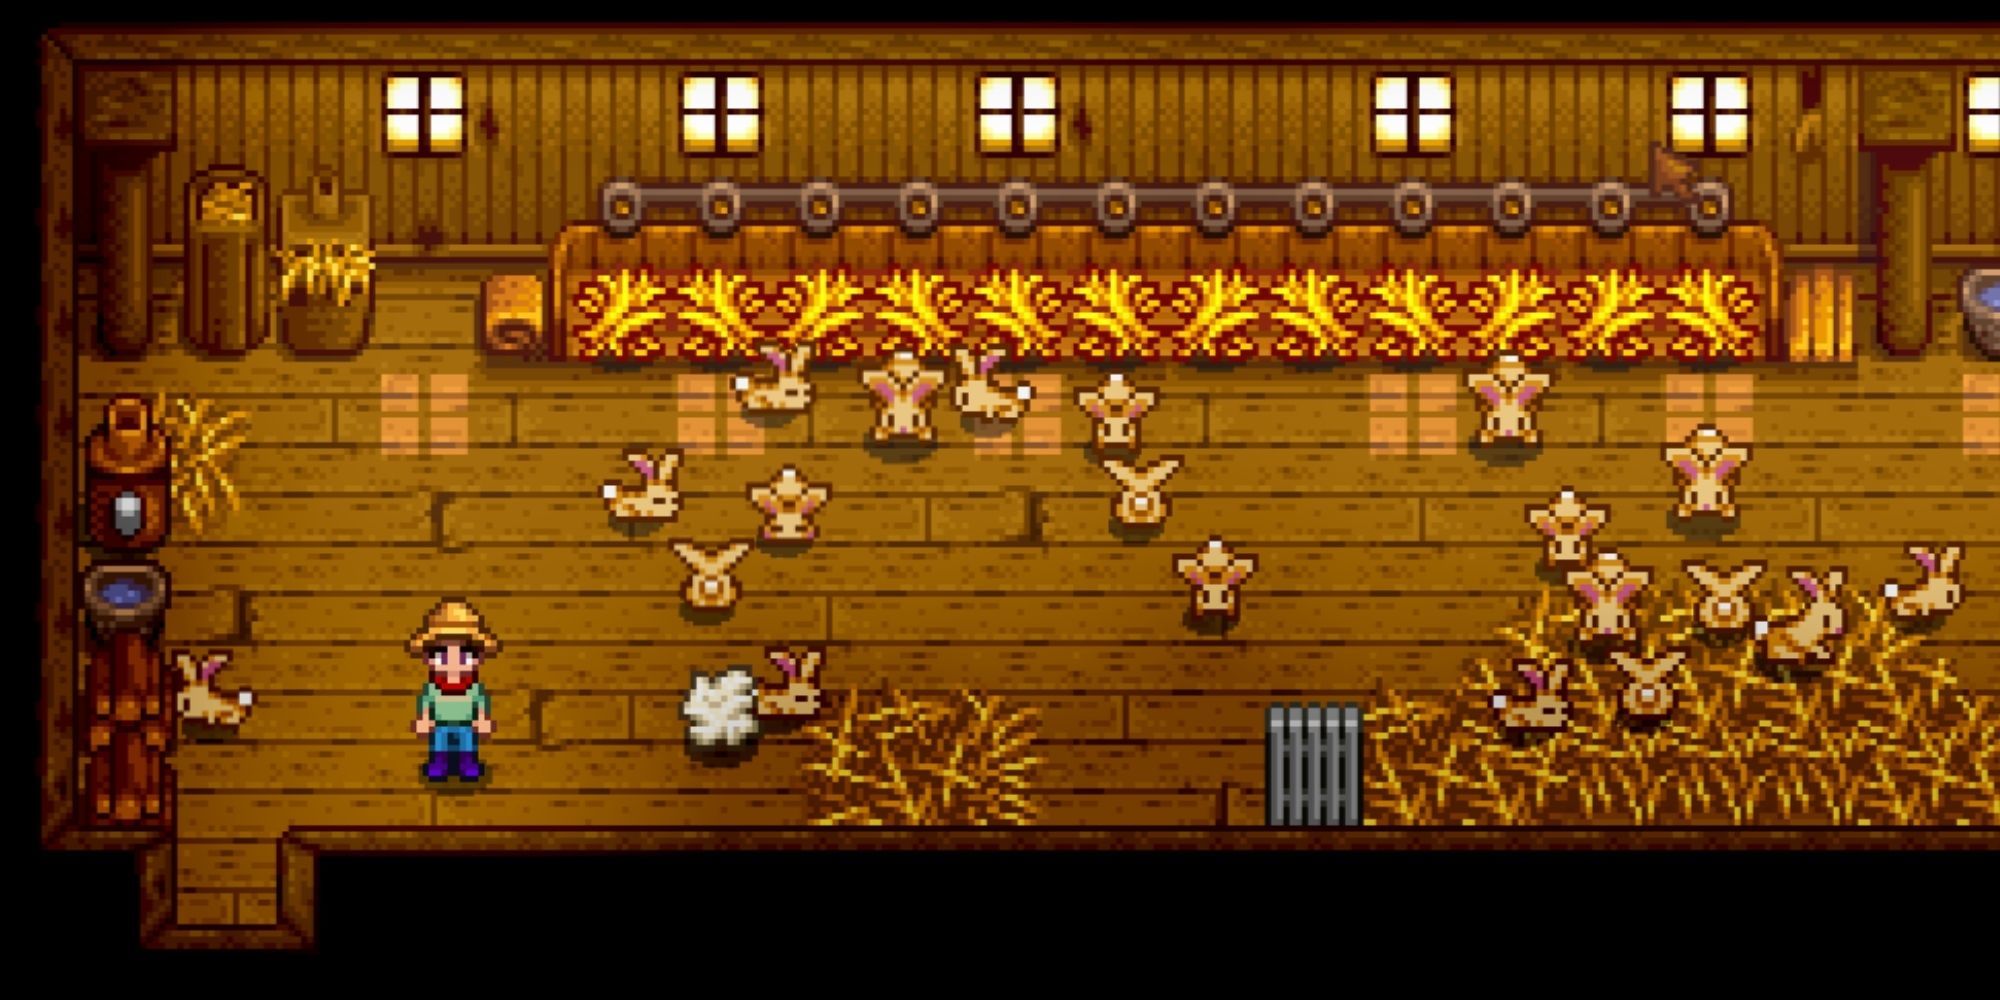 Stardew Valley - Rabbits in a Deluxe Coop with player standing near entrance